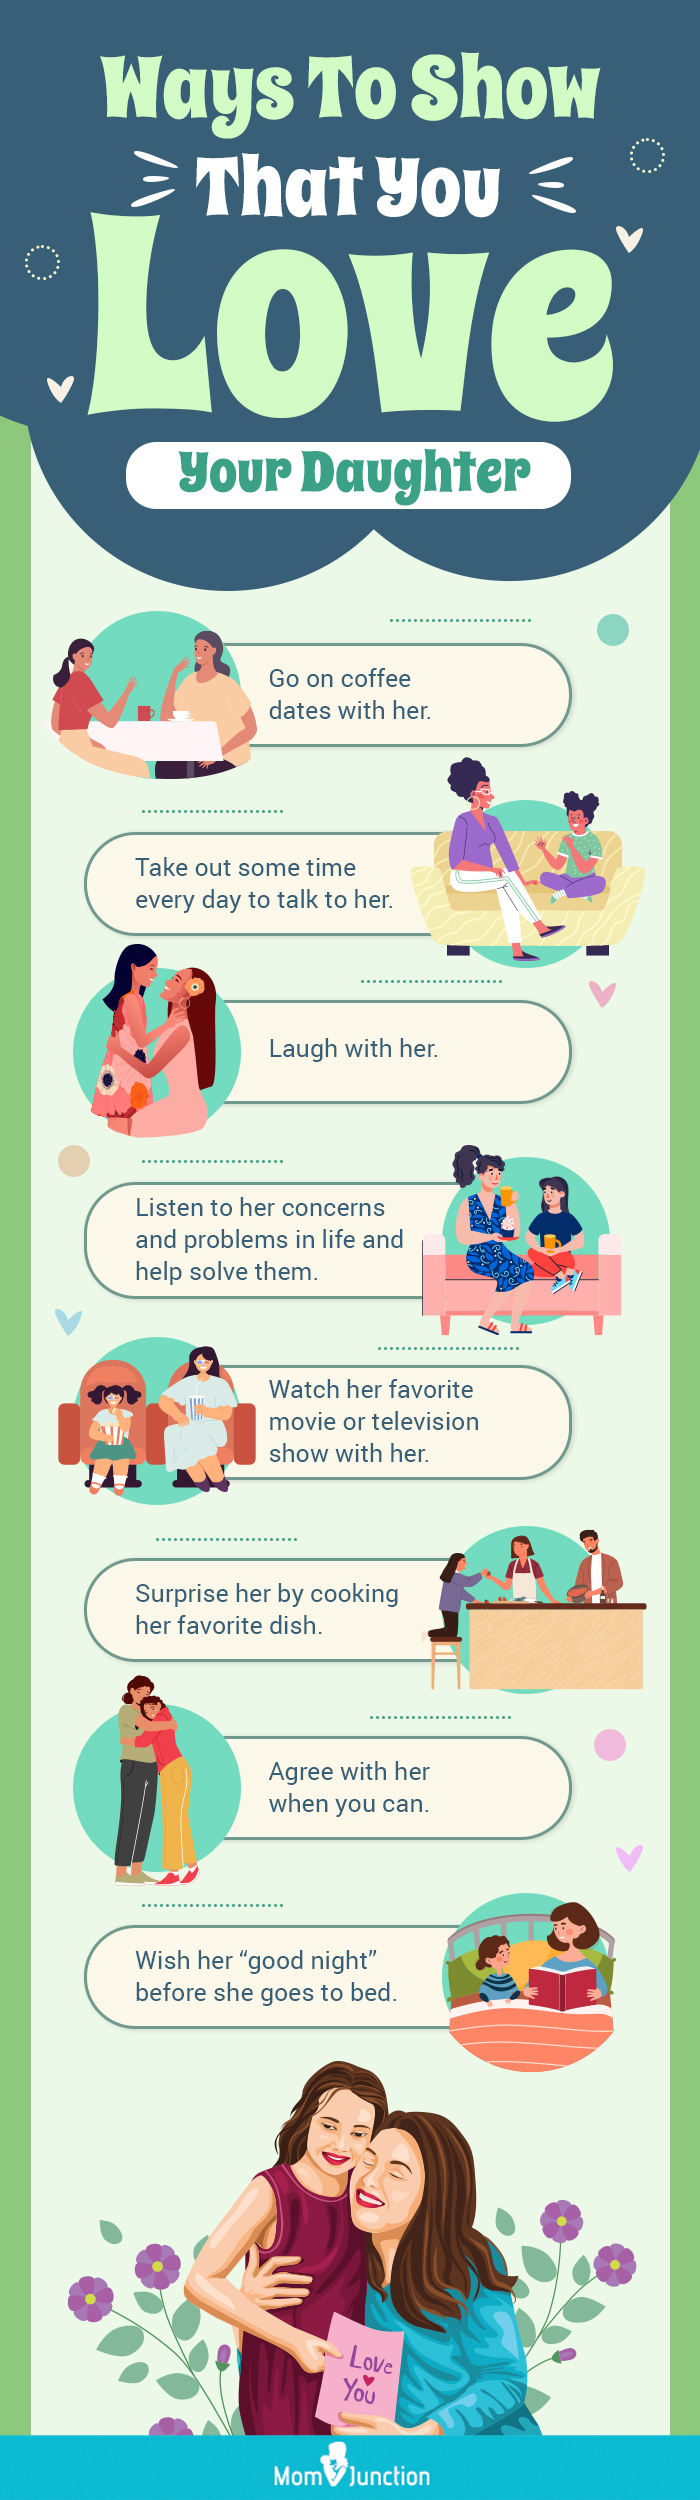 tips for conveying your love to daughter (infographic)